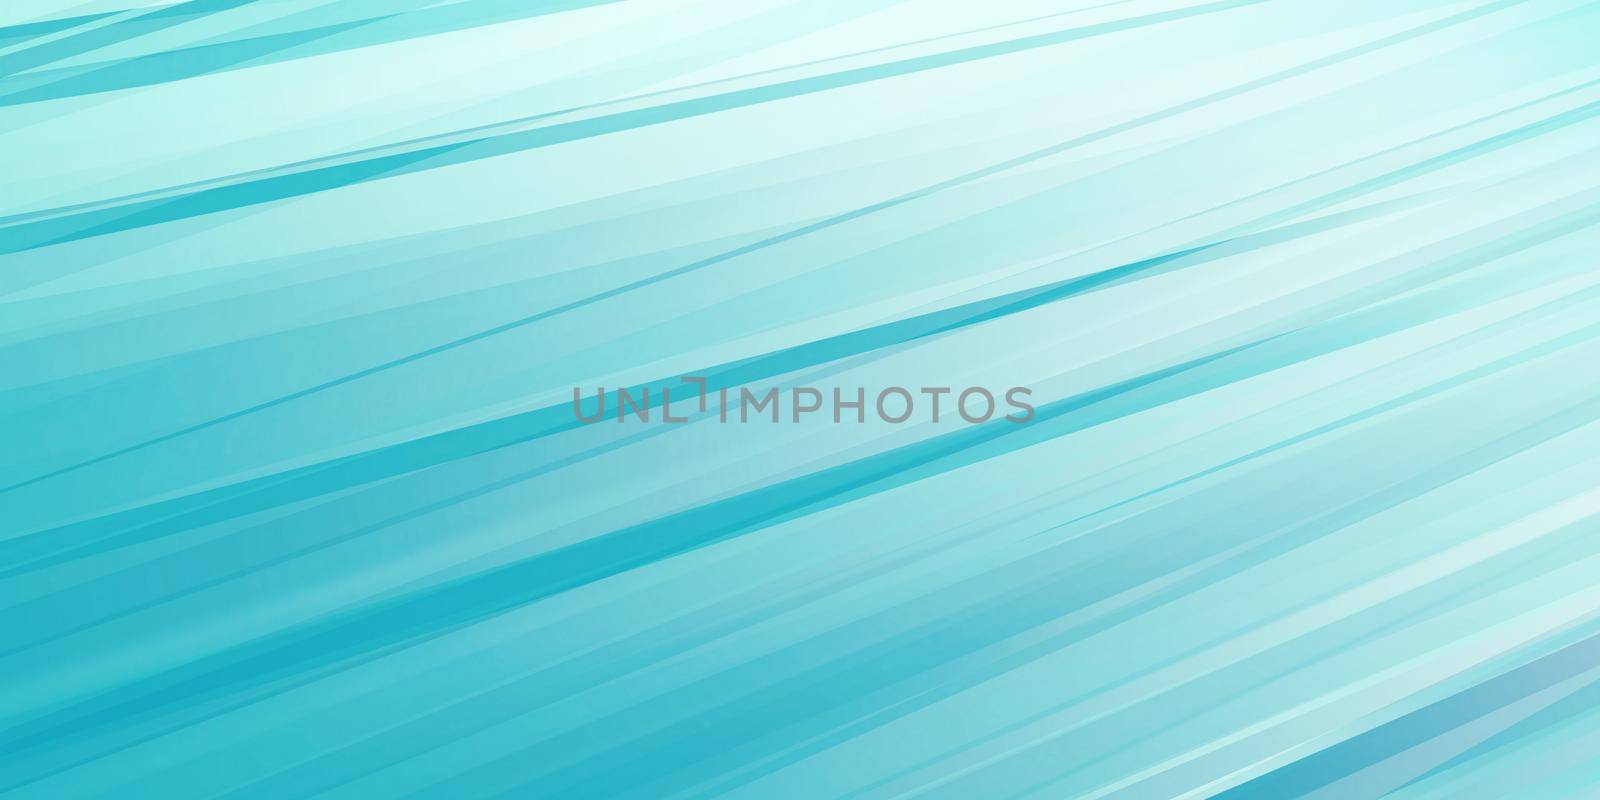 Digital Design Creative Abstract Background in Blue